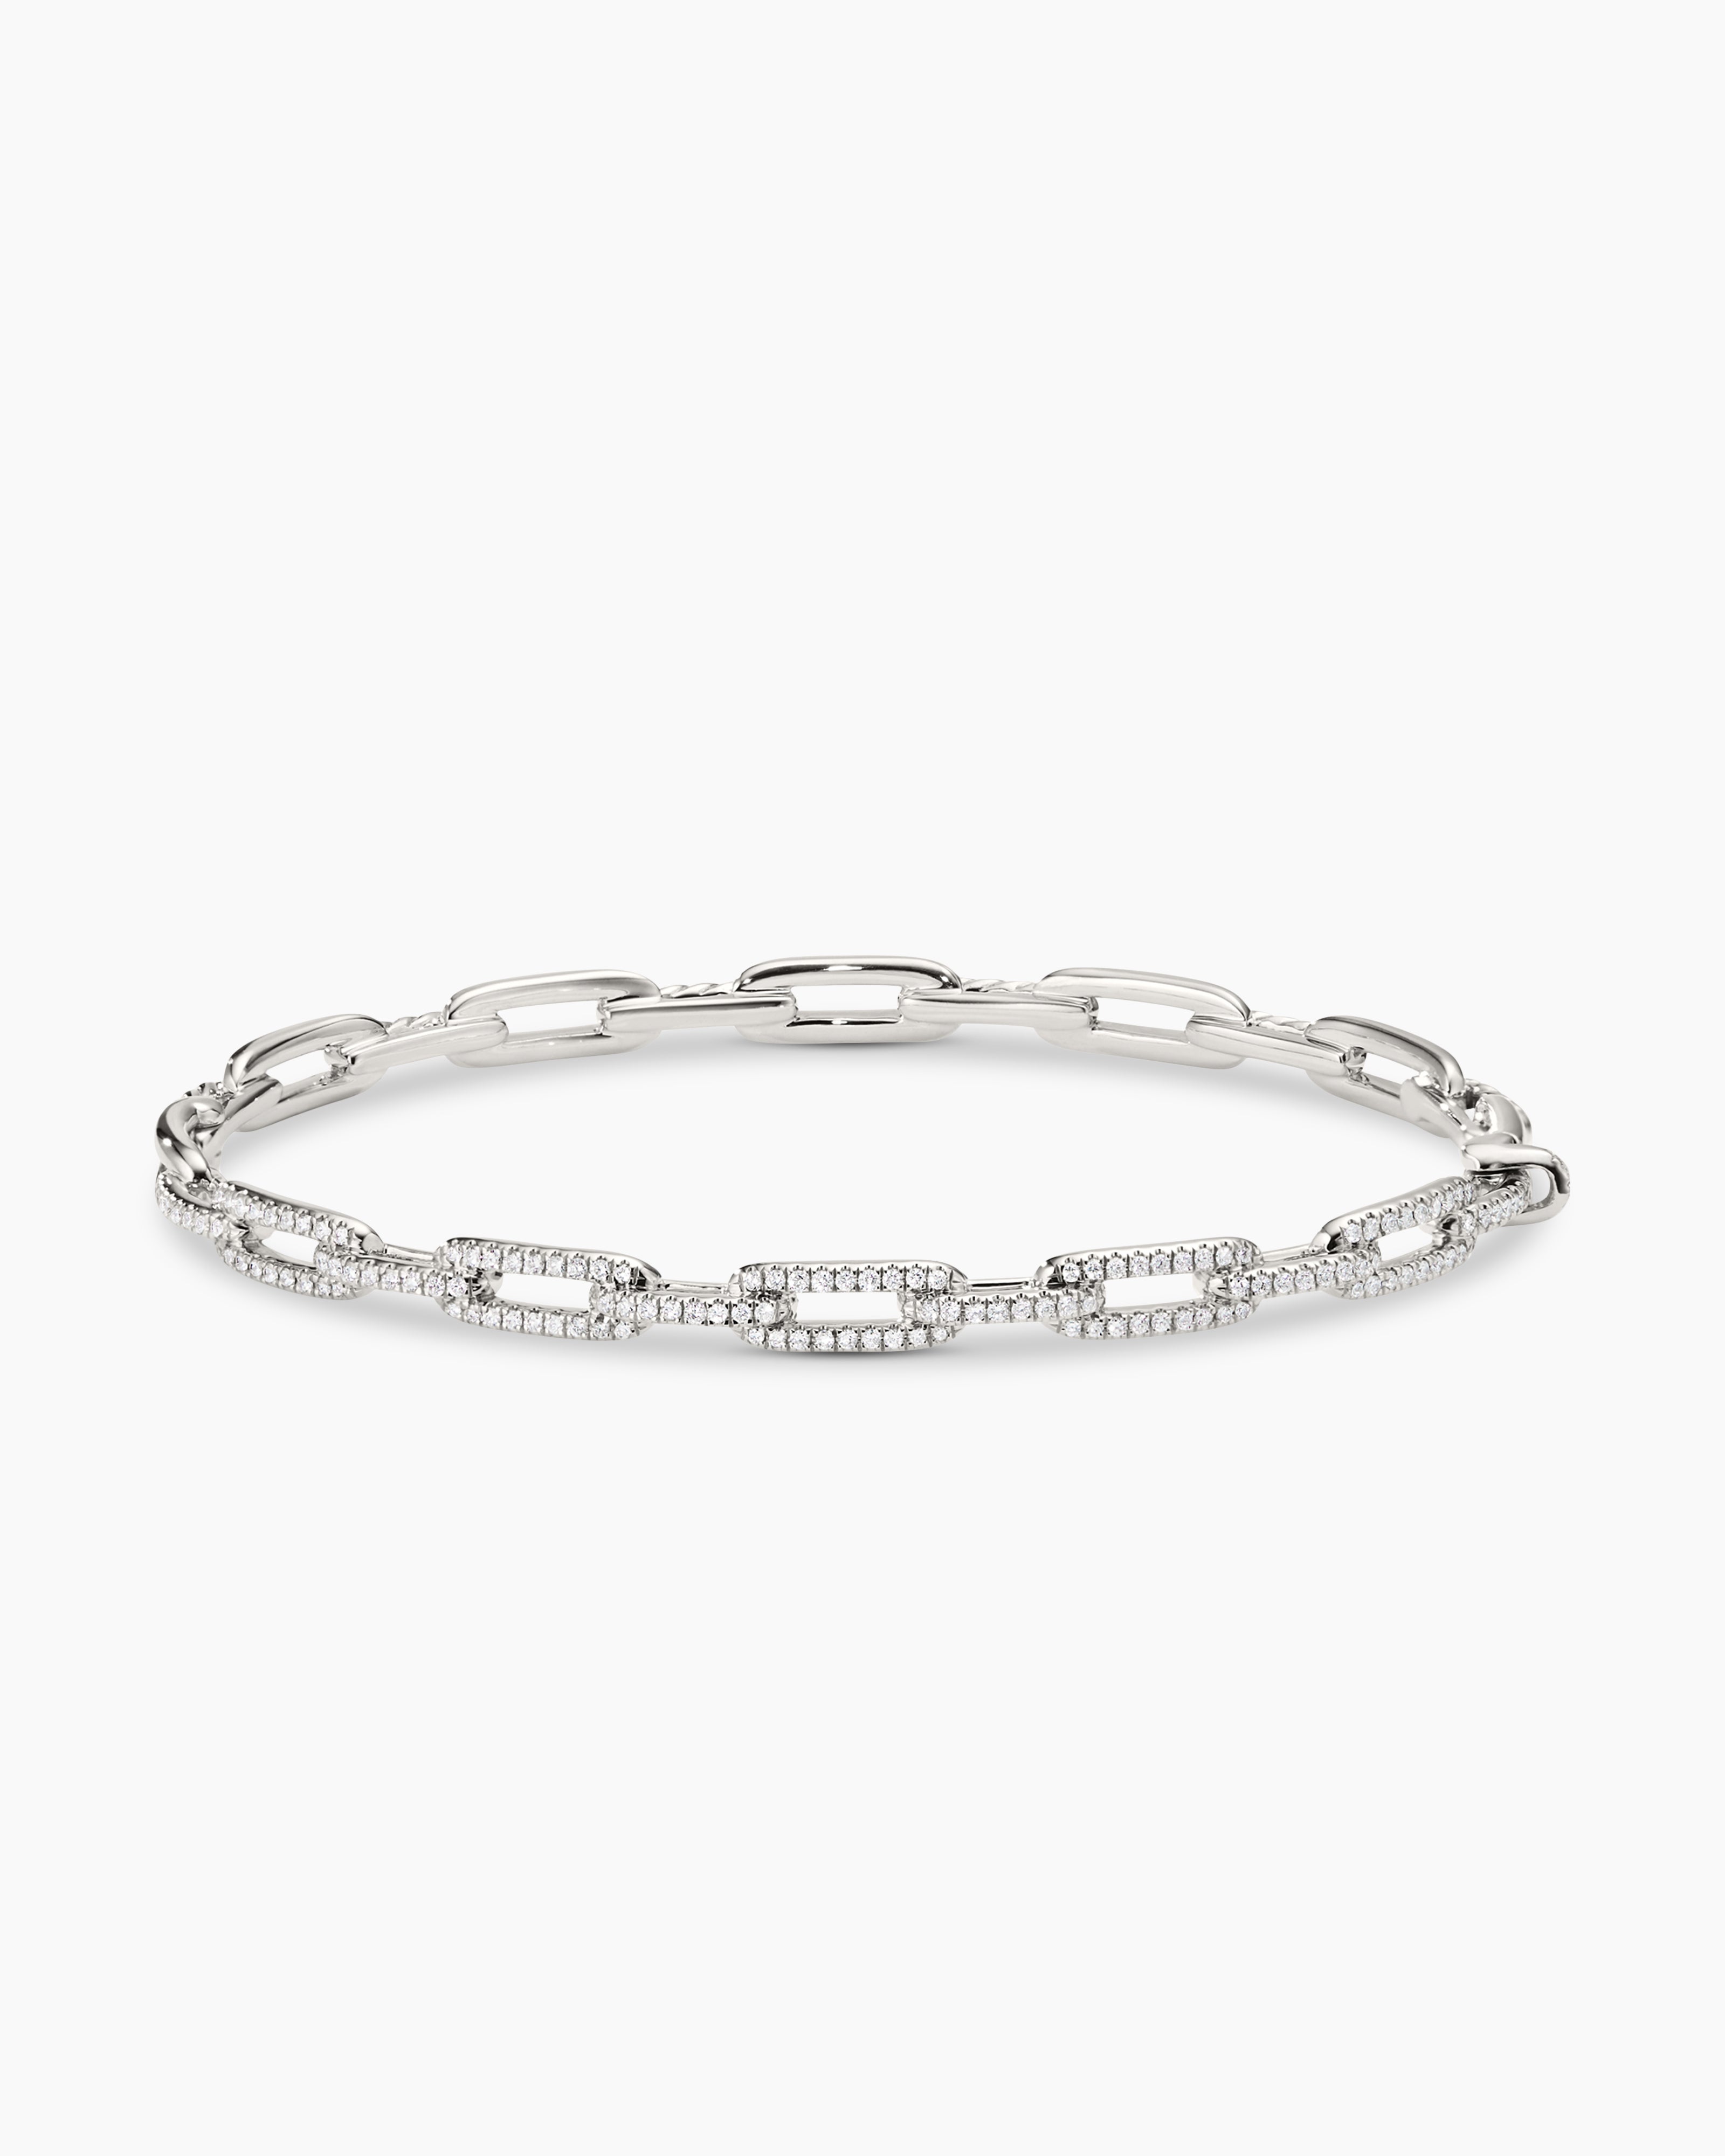 Diamond Bracelets for Women | Indian Gold Bangles in Decatur, CA